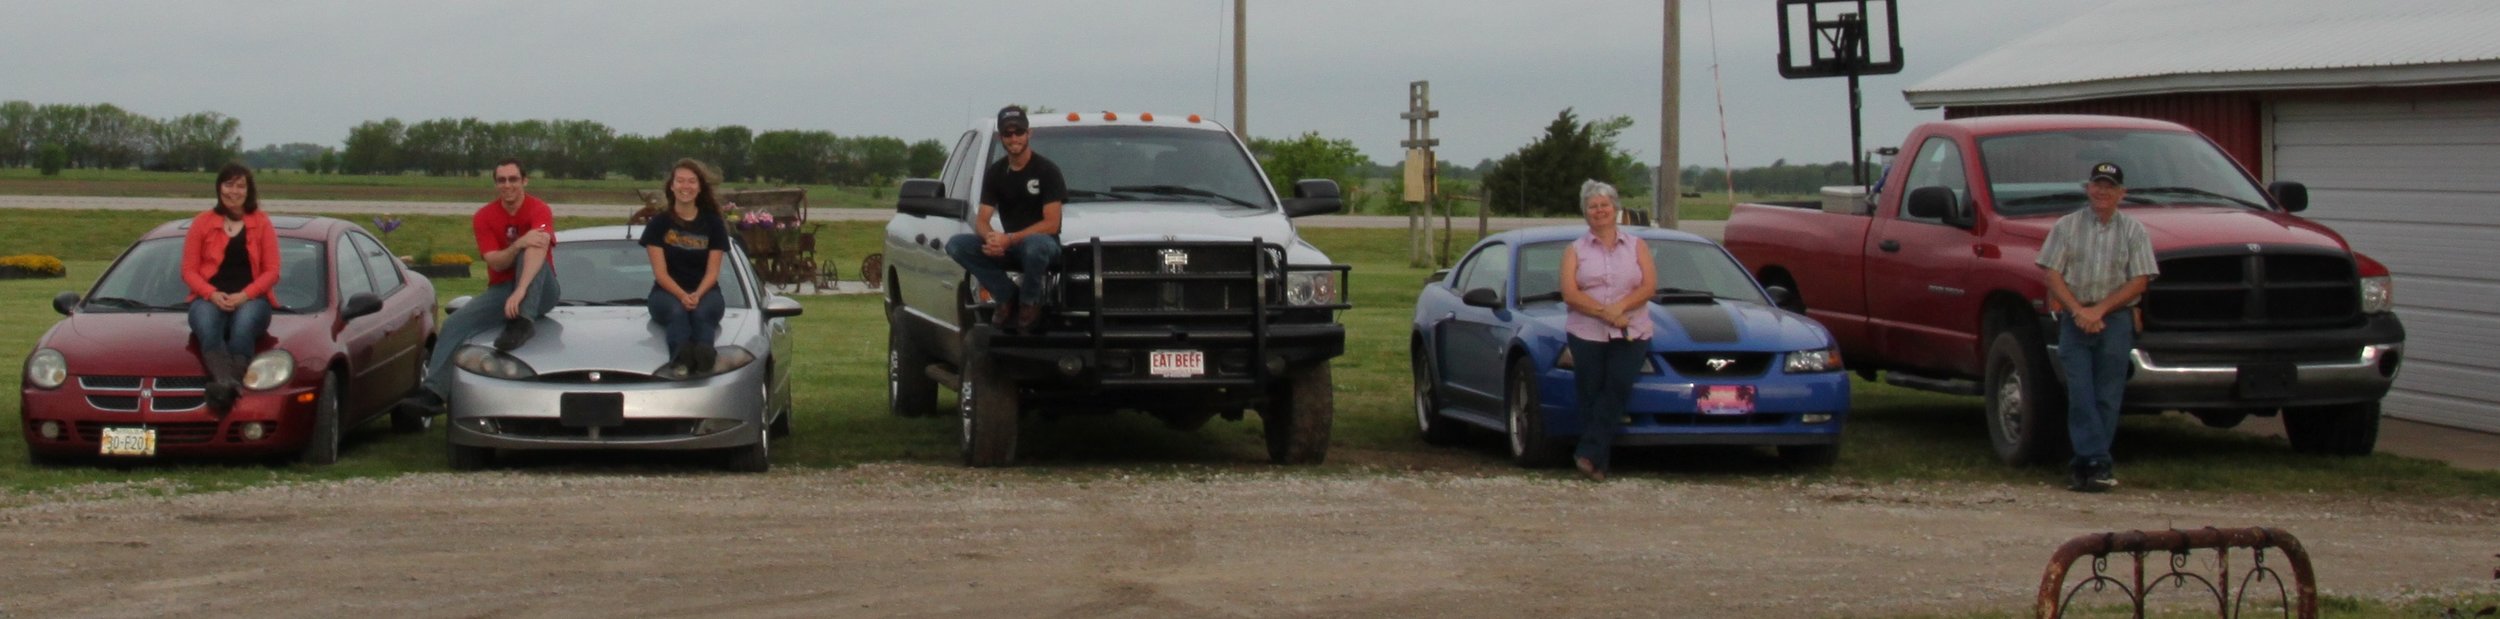 I was NOT a Dodge fan, until I met him. But … I mean, how could I not be?? (still a Chevy girl at heart though!)